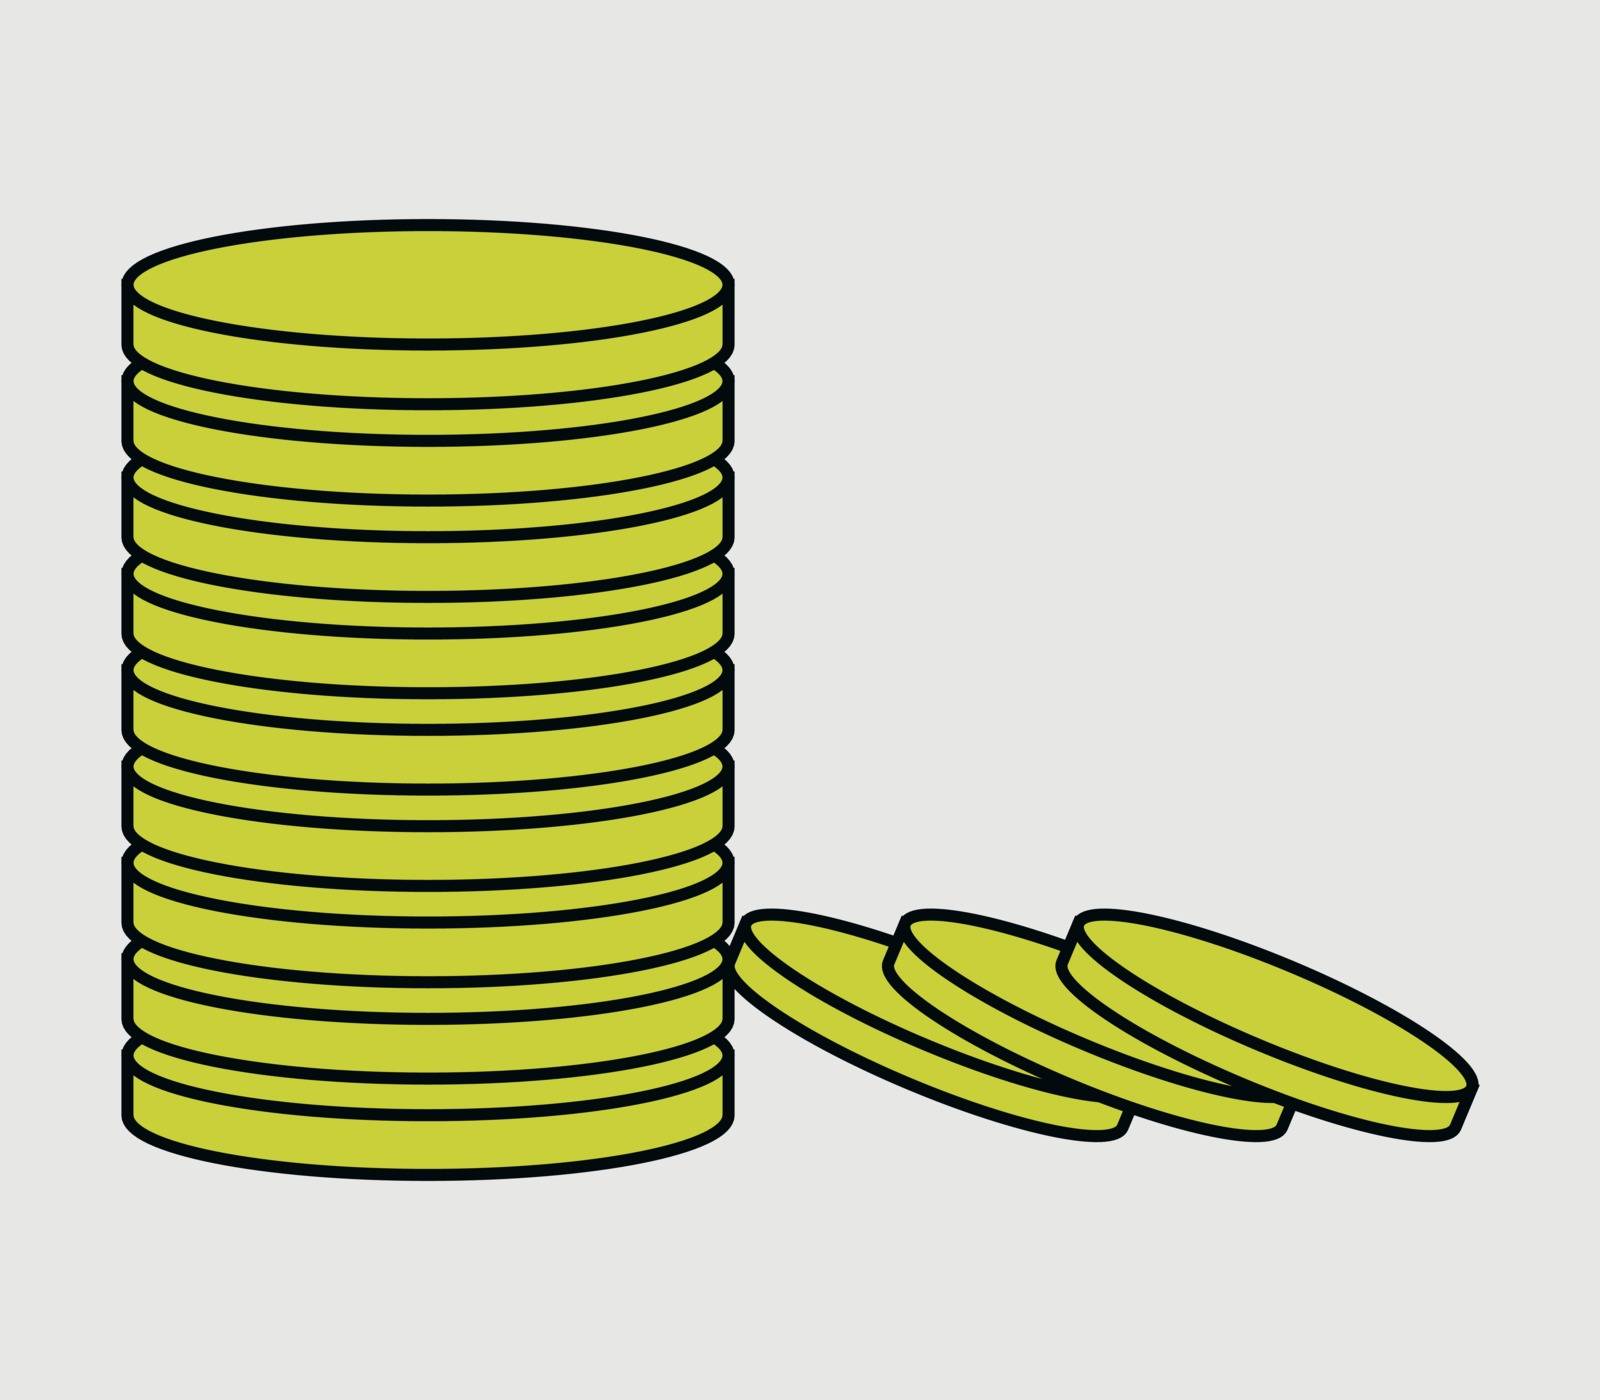 coin money icon by Mark1987